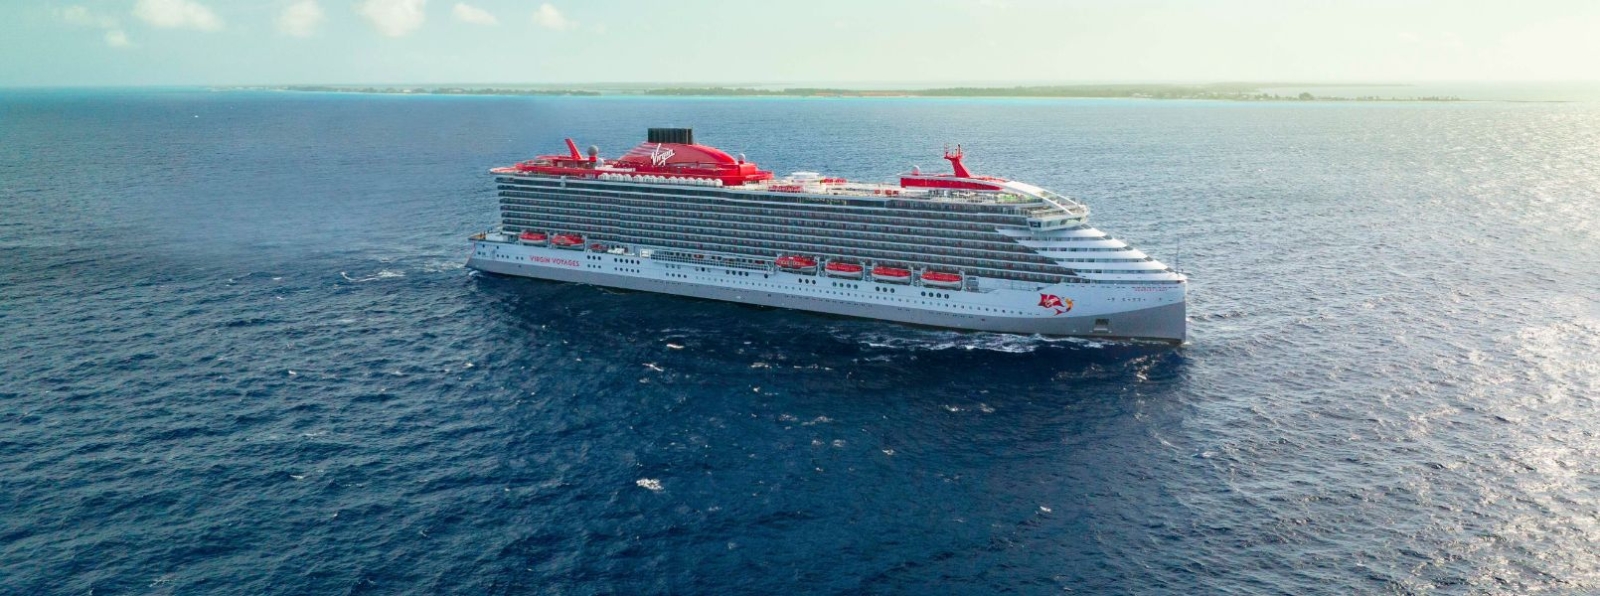 virgin voyages from uk